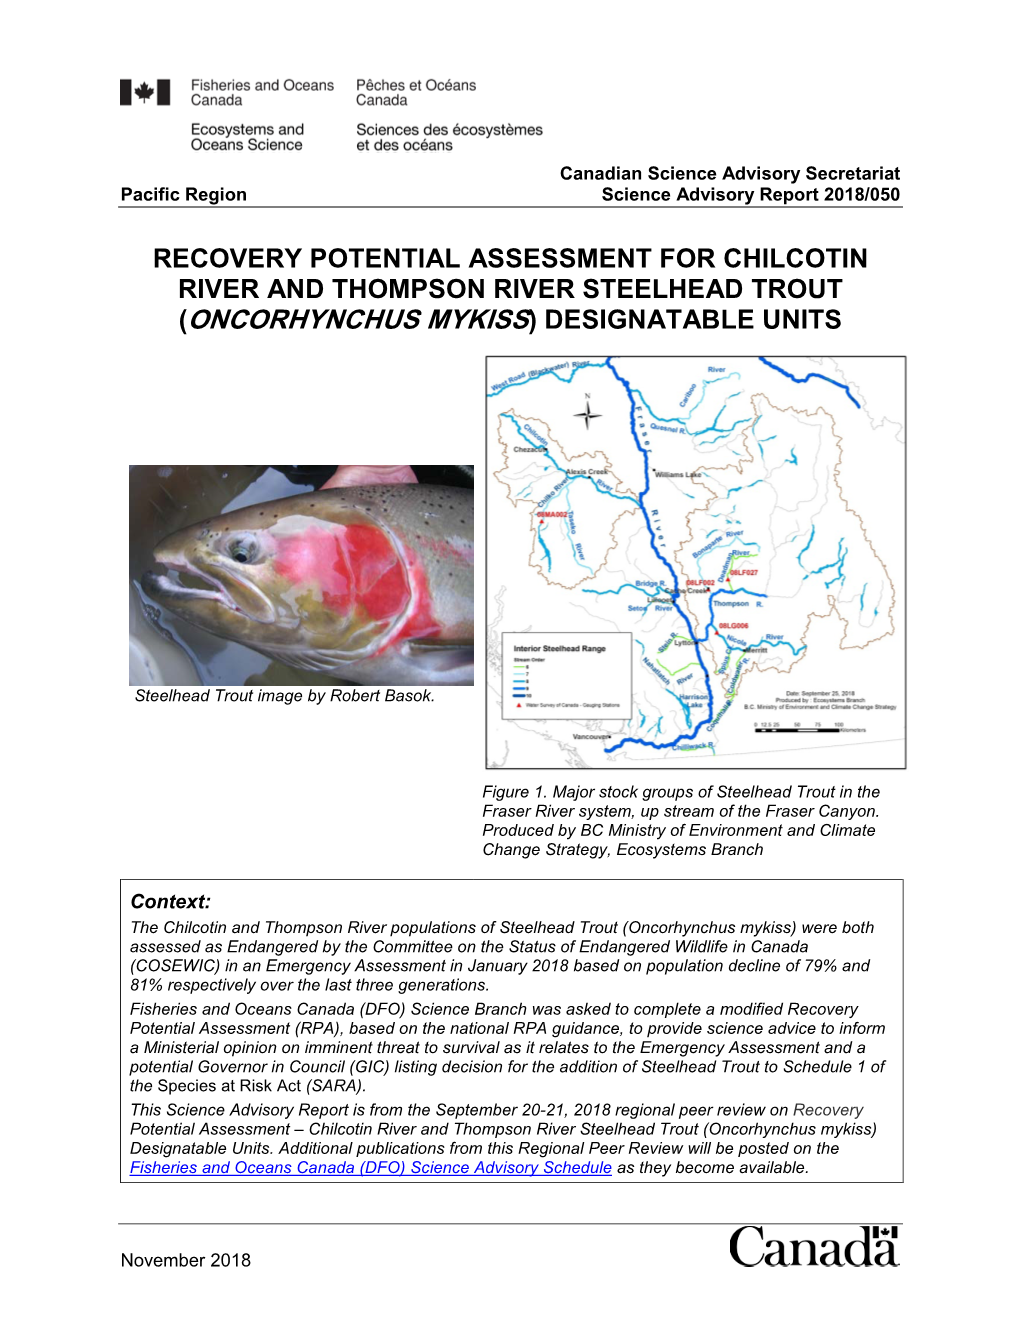 Recovery Potential Assessment for Chilcotin River and Thompson River